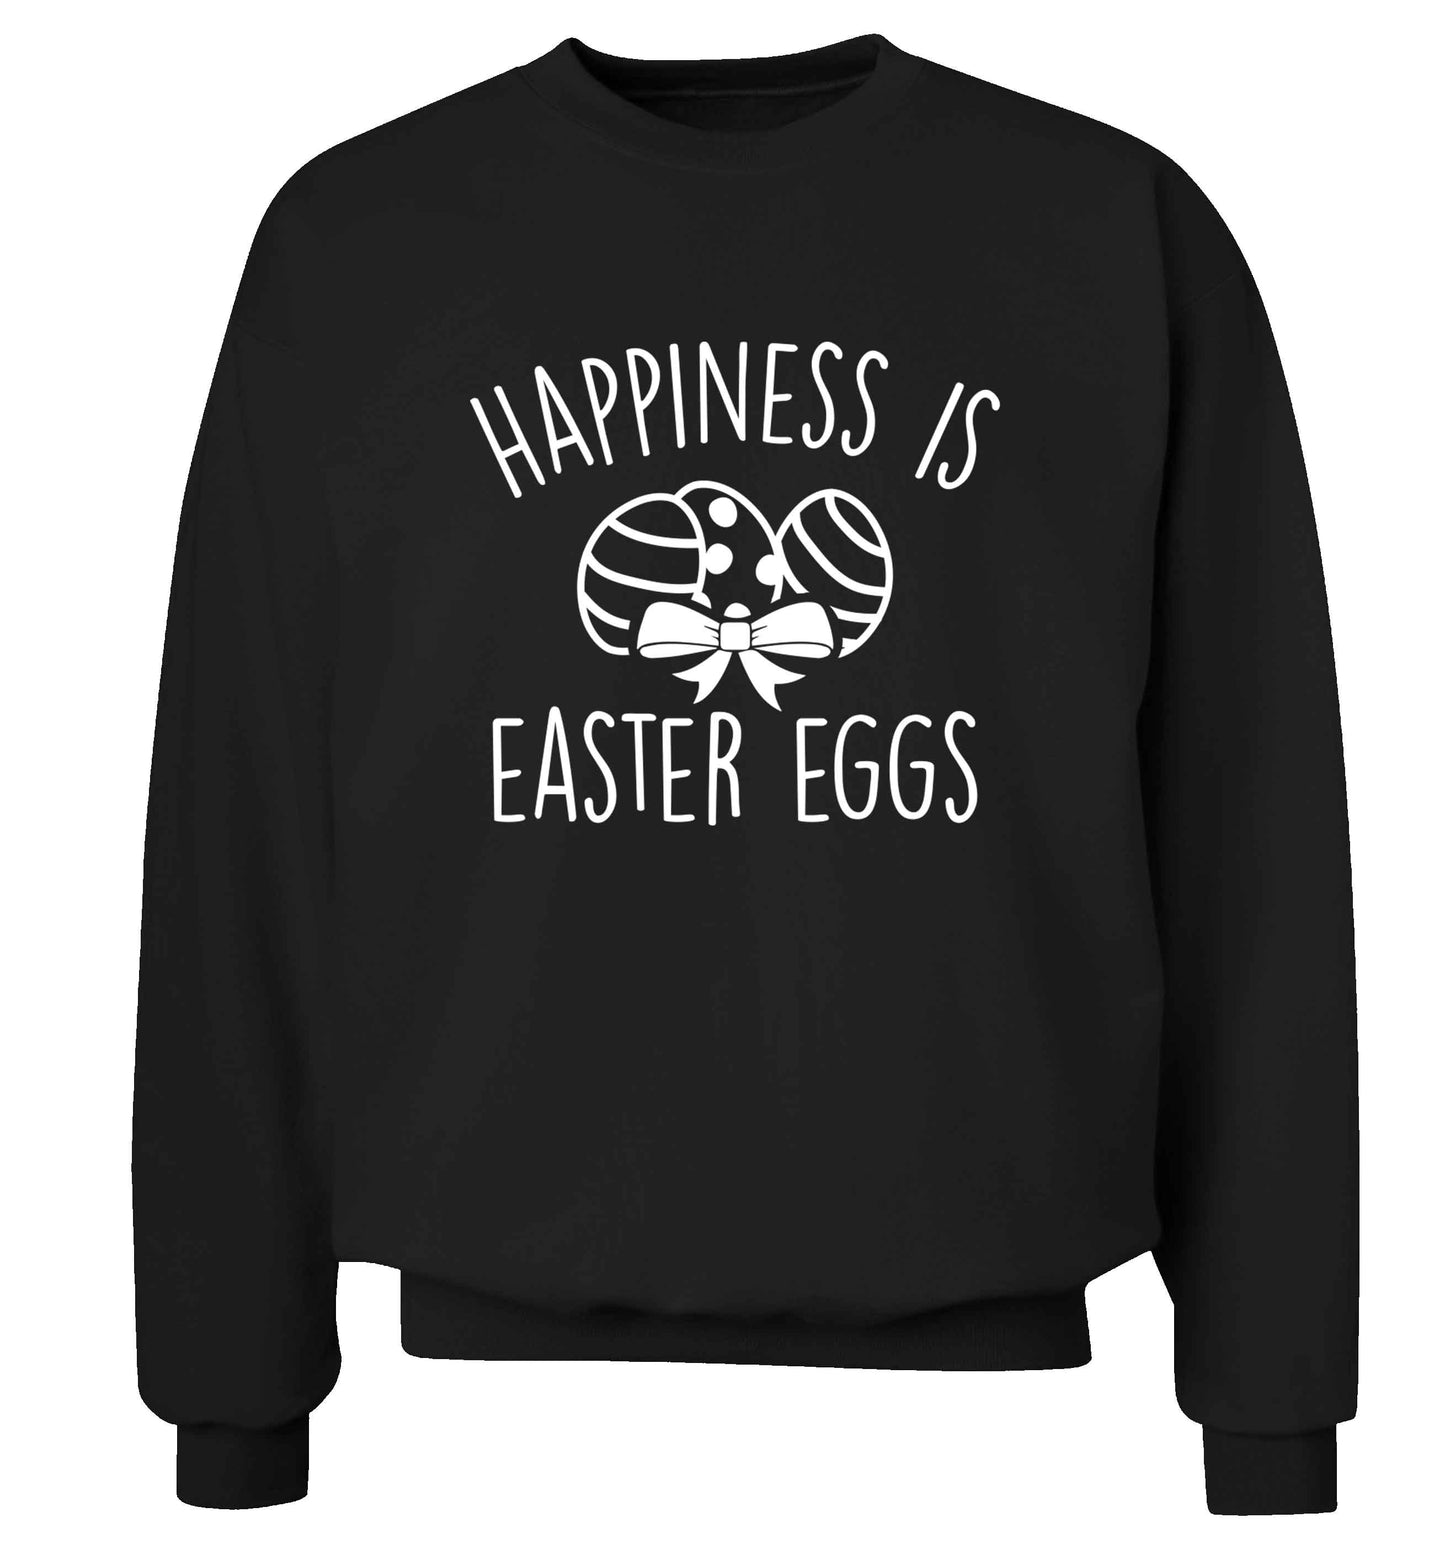 Happiness is Easter eggs adult's unisex black sweater 2XL